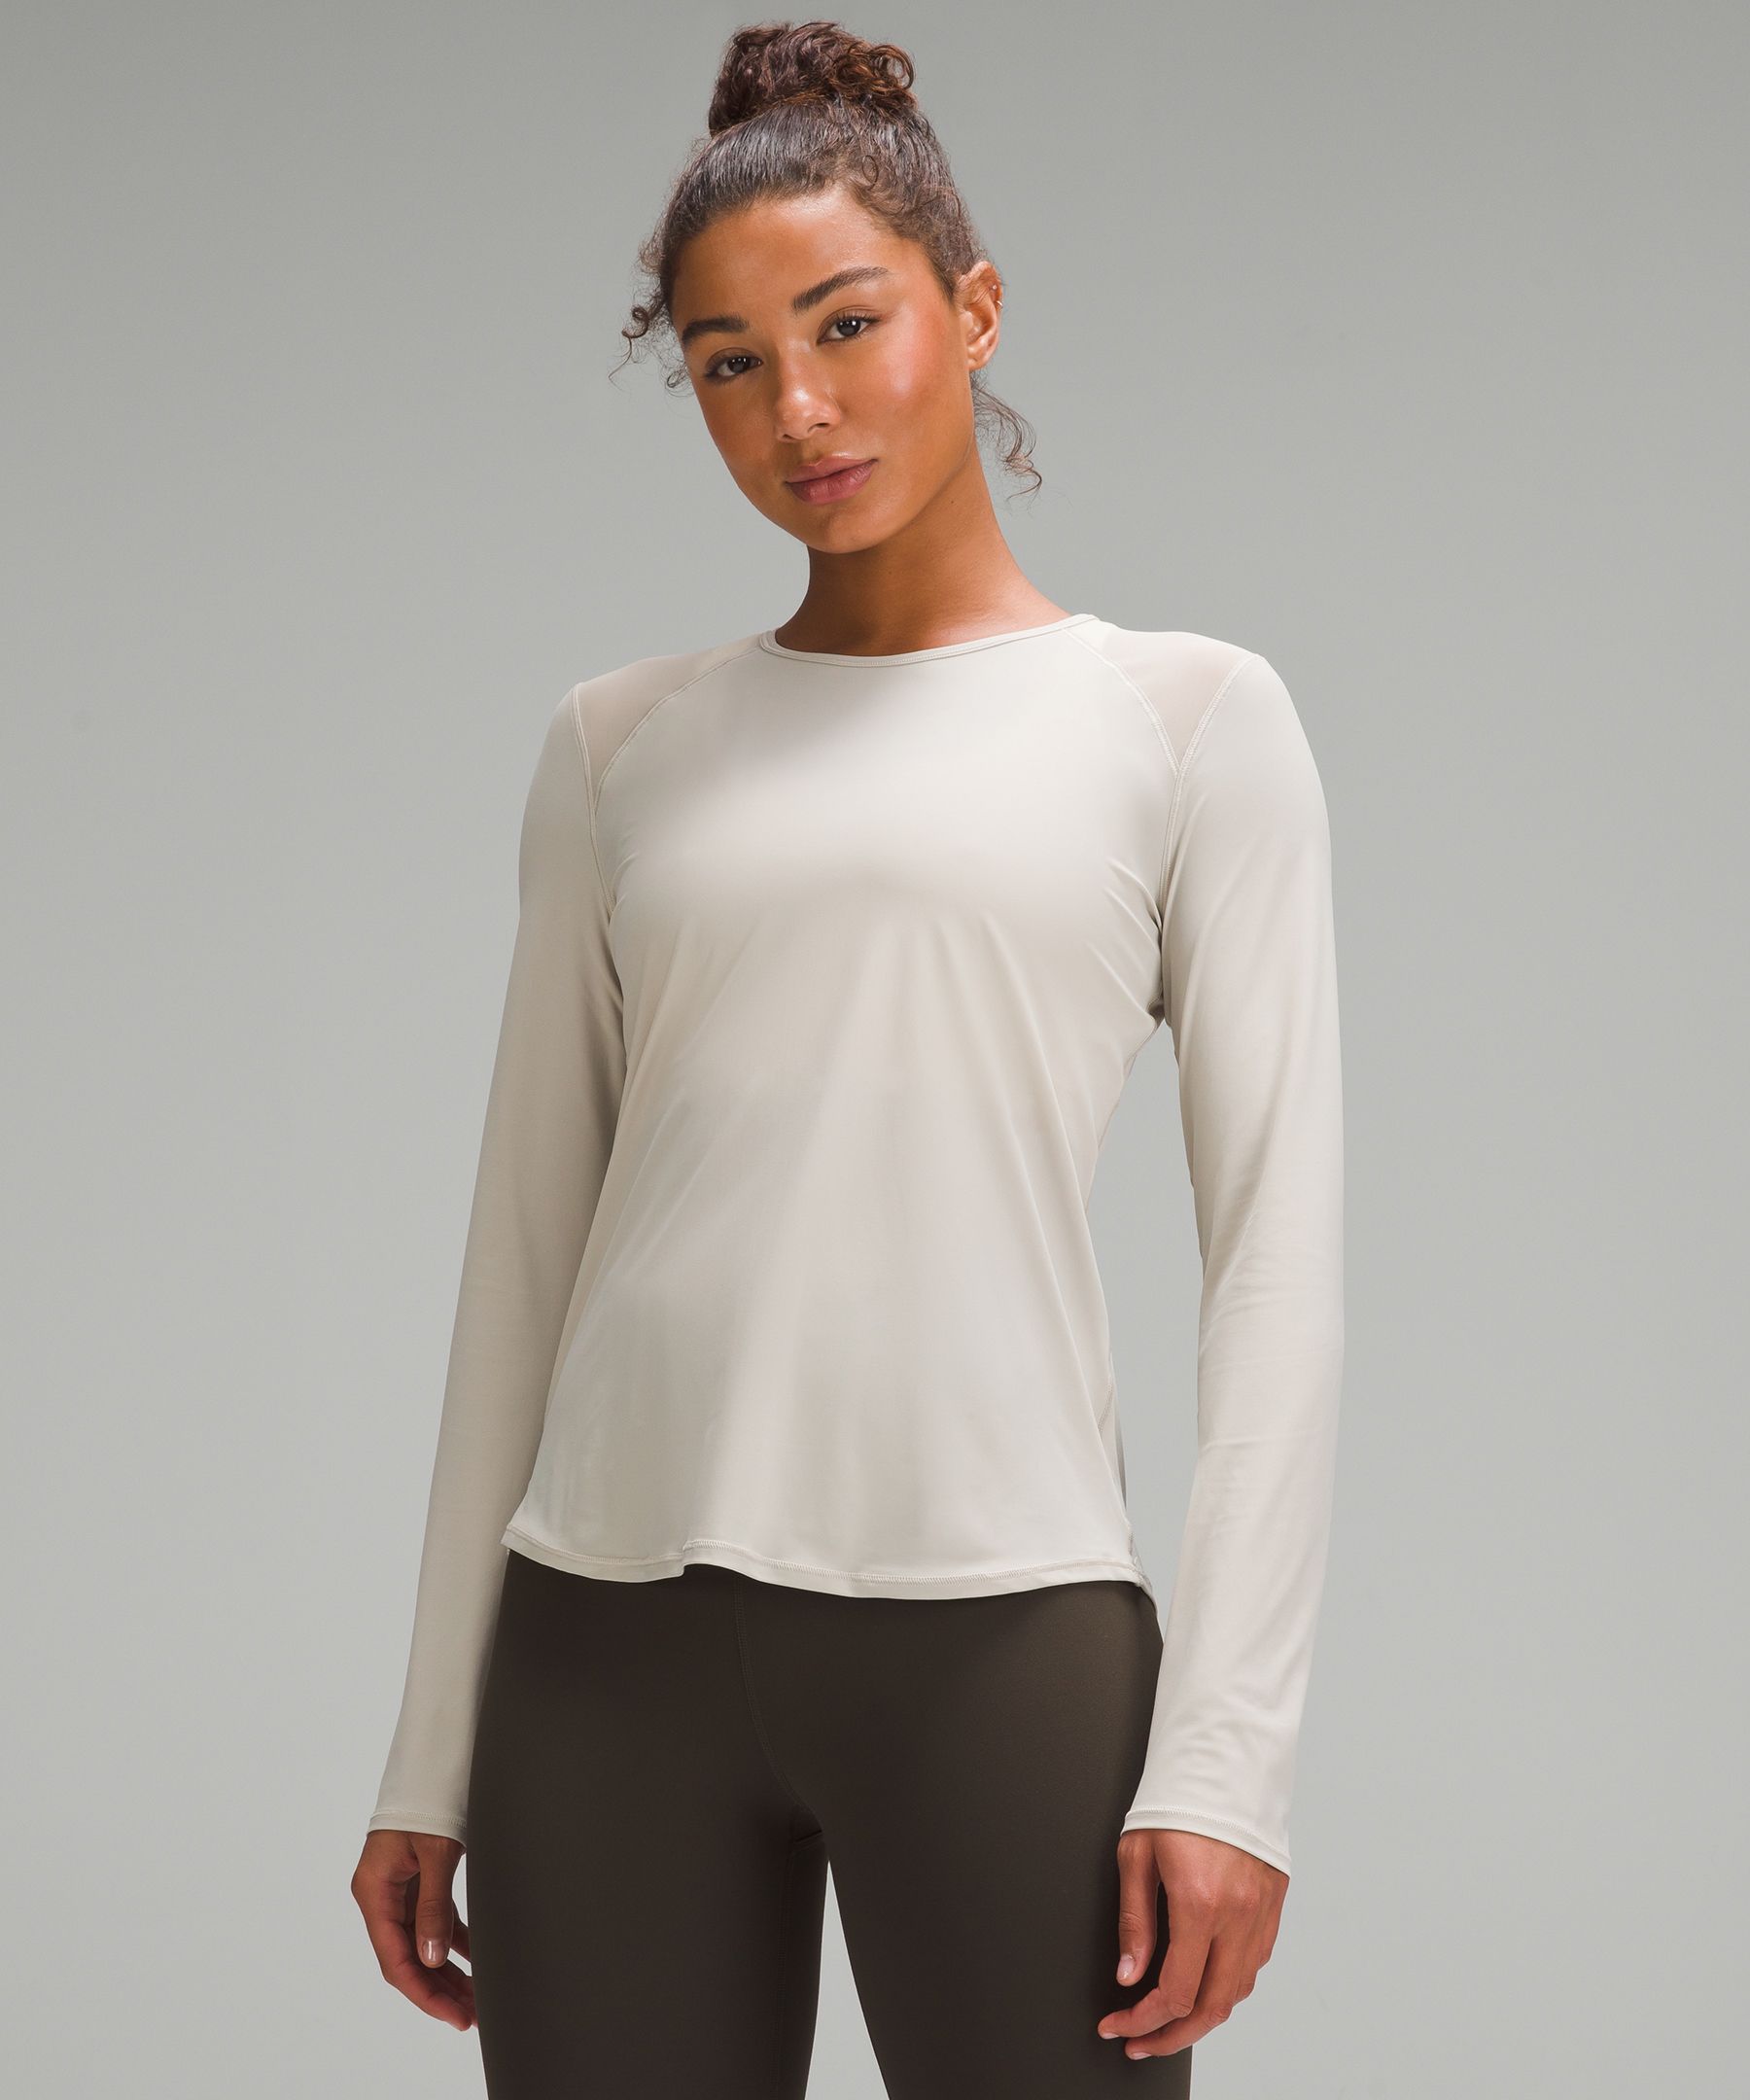 Long Sleeve Workout Tops for Women